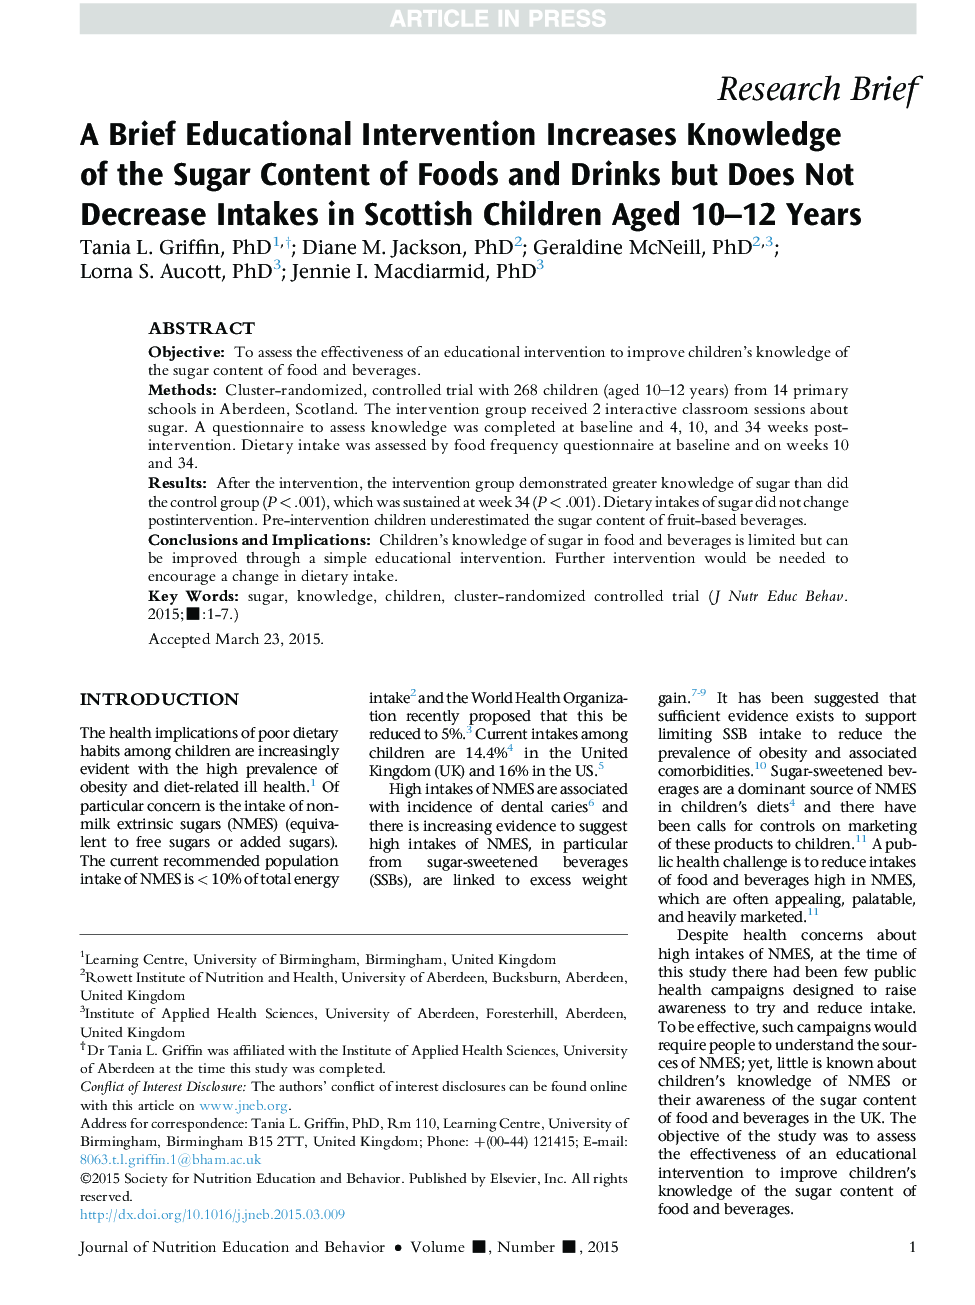 A Brief Educational Intervention Increases Knowledge ofÂ theÂ Sugar Content of Foods and Drinks but Does Not Decrease Intakes inÂ Scottish Children Aged 10-12 Years